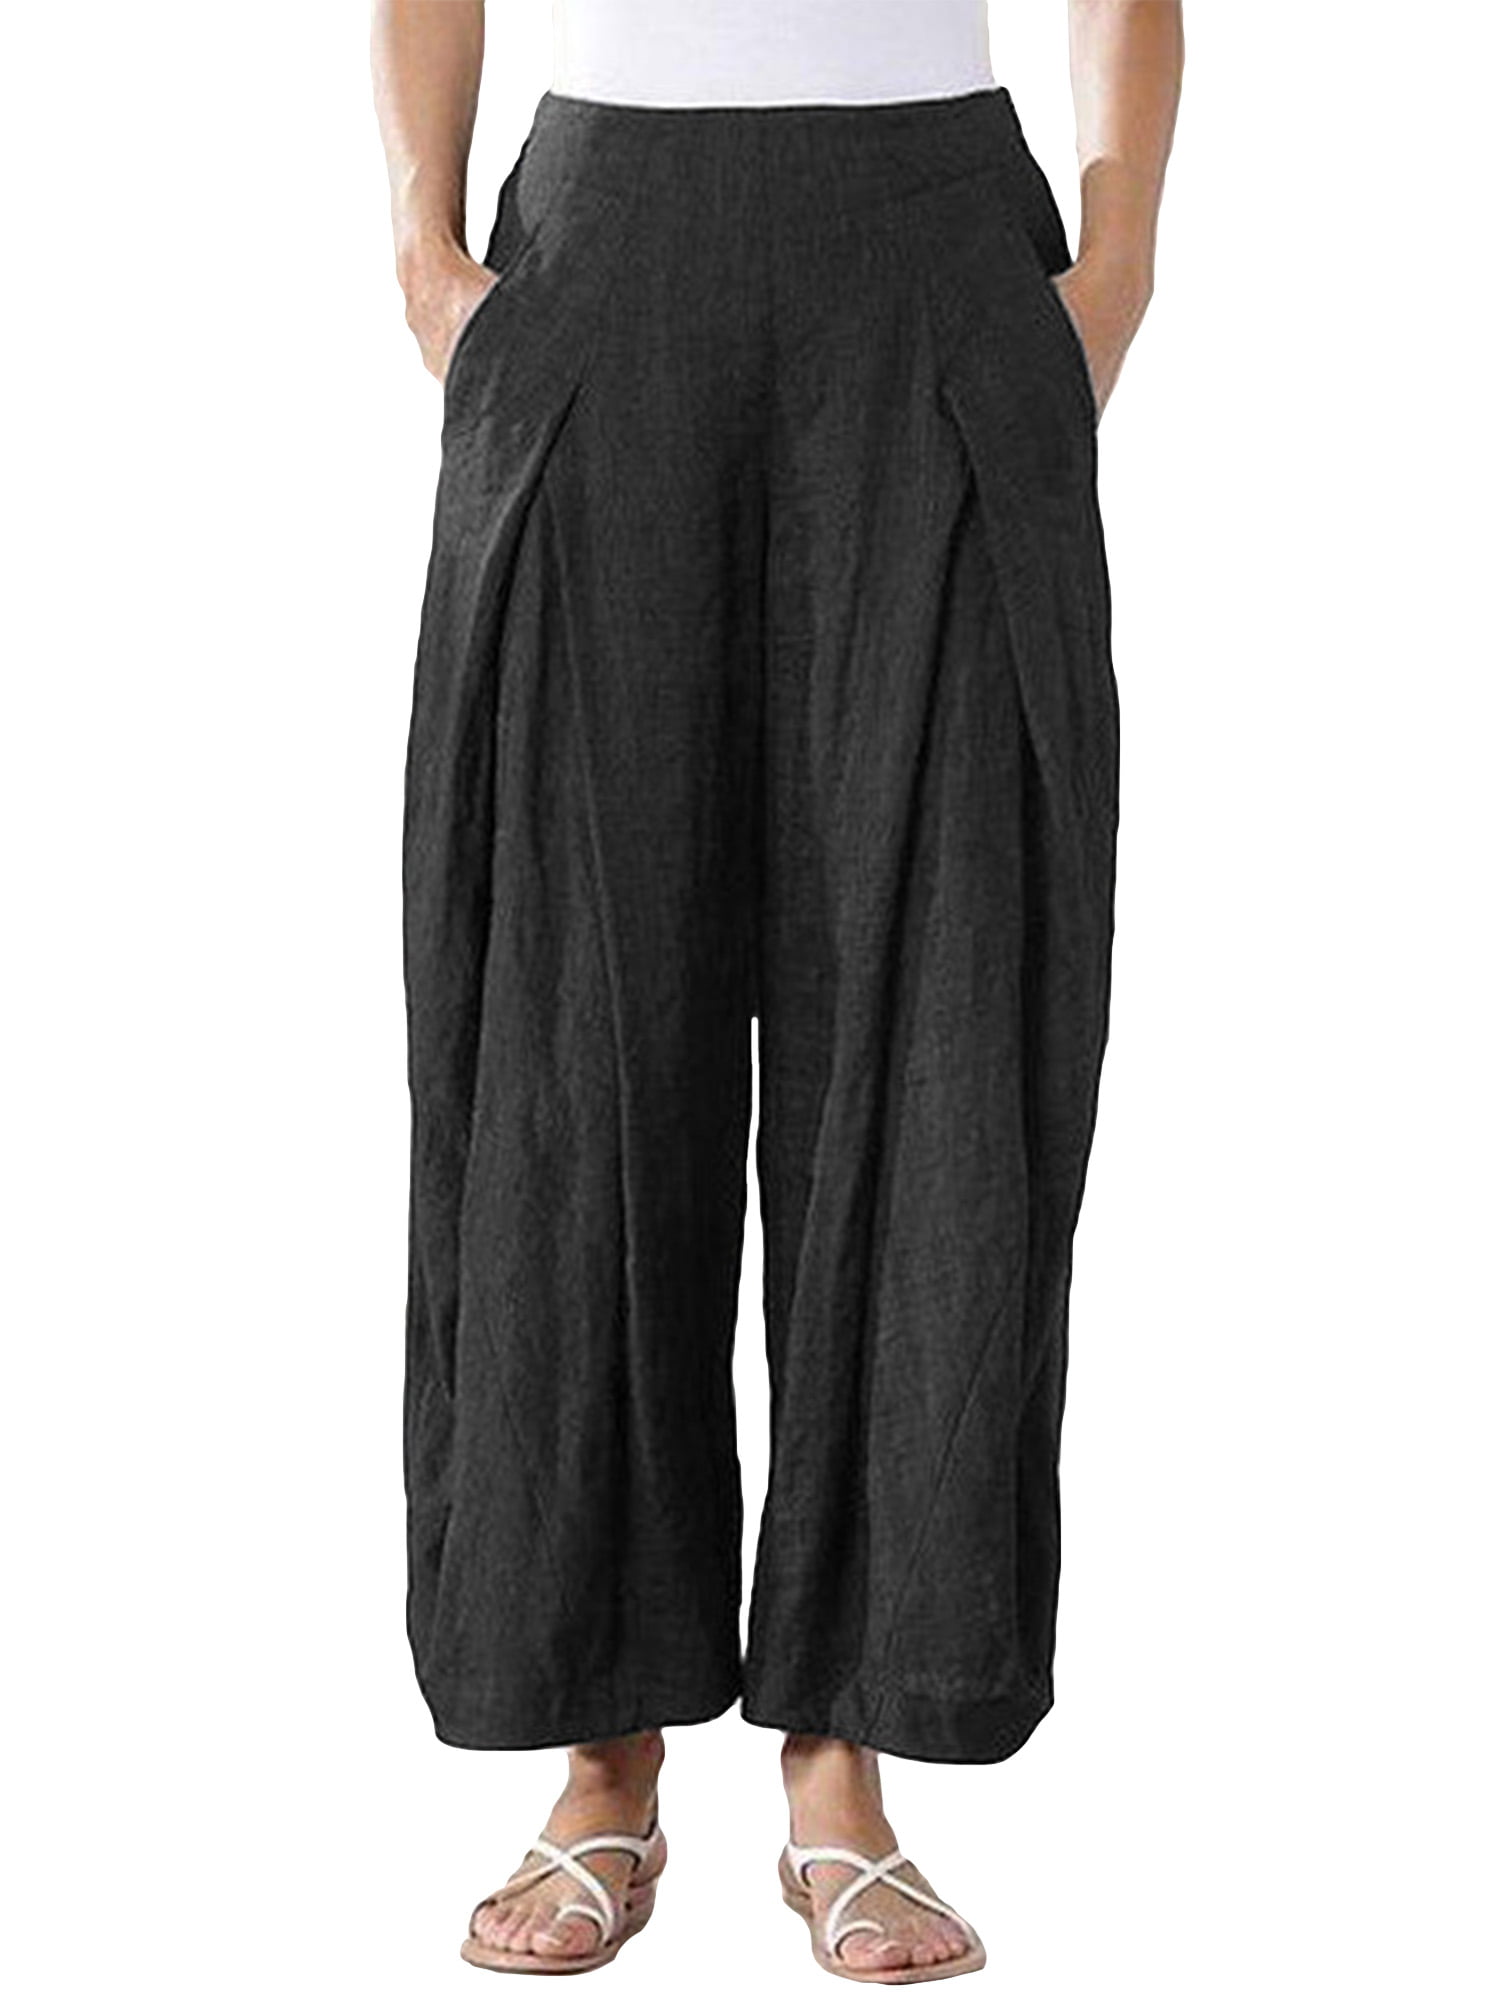 Natural Linen Pants with mini front pockets Flare legs pants Black Color Natural Linen Black Linen